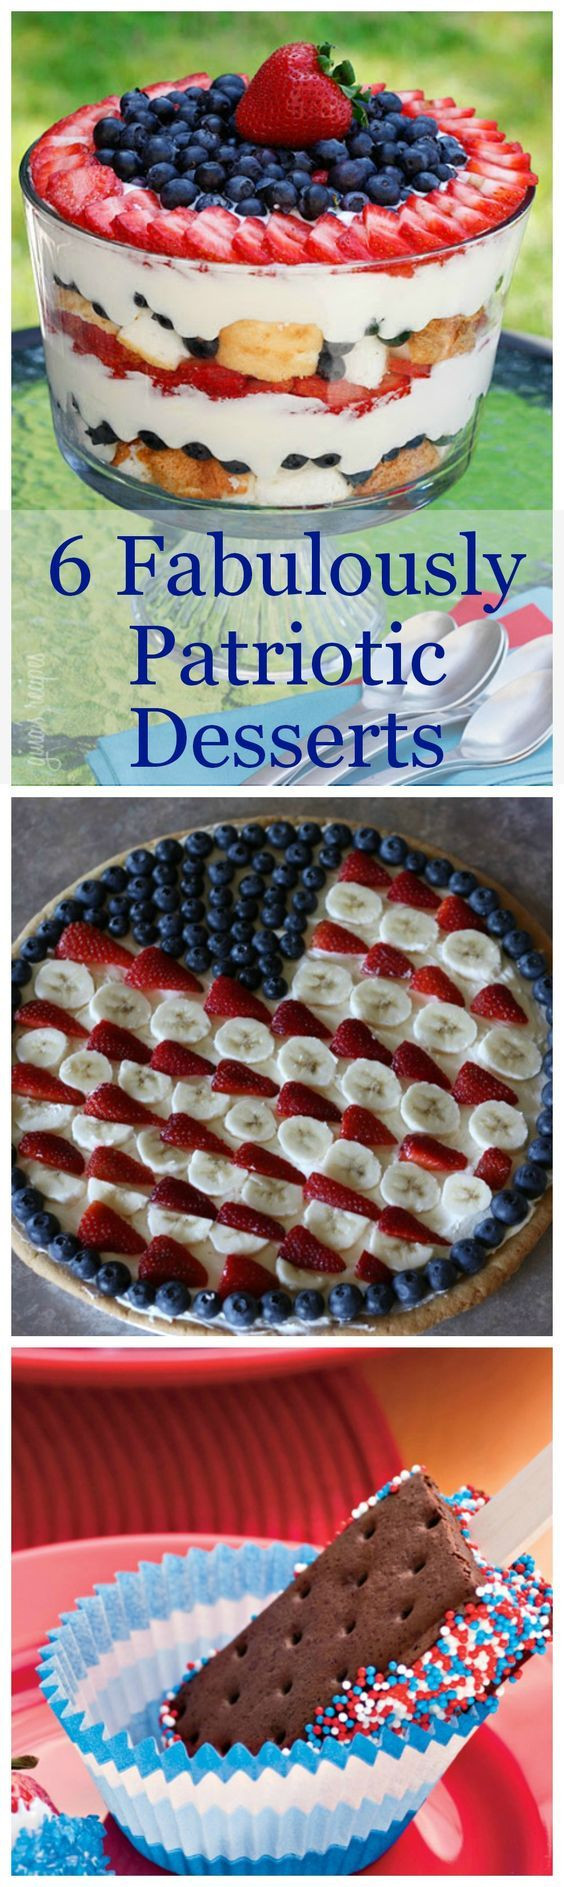 Quick 4Th Of July Desserts
 Quick And Easy 4th of July Desserts